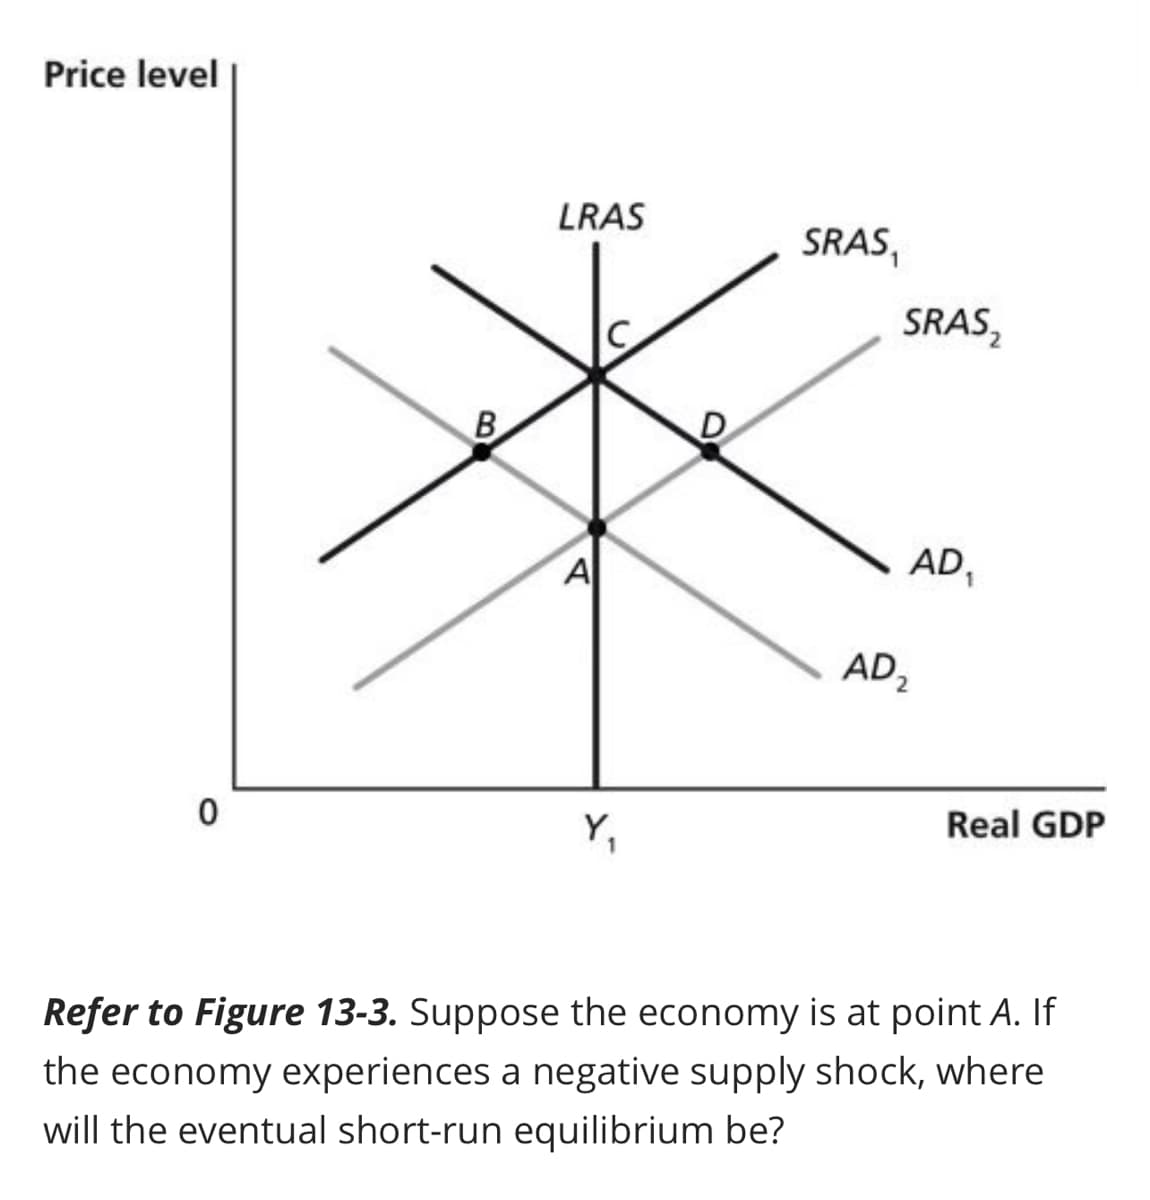 Price level
0
B
LRAS
A]
1
SRAS,
SRAS₂
AD₁
AD₂
Real GDP
Refer to Figure 13-3. Suppose the economy is at point A. If
the economy experiences a negative supply shock, where
will the eventual short-run equilibrium be?